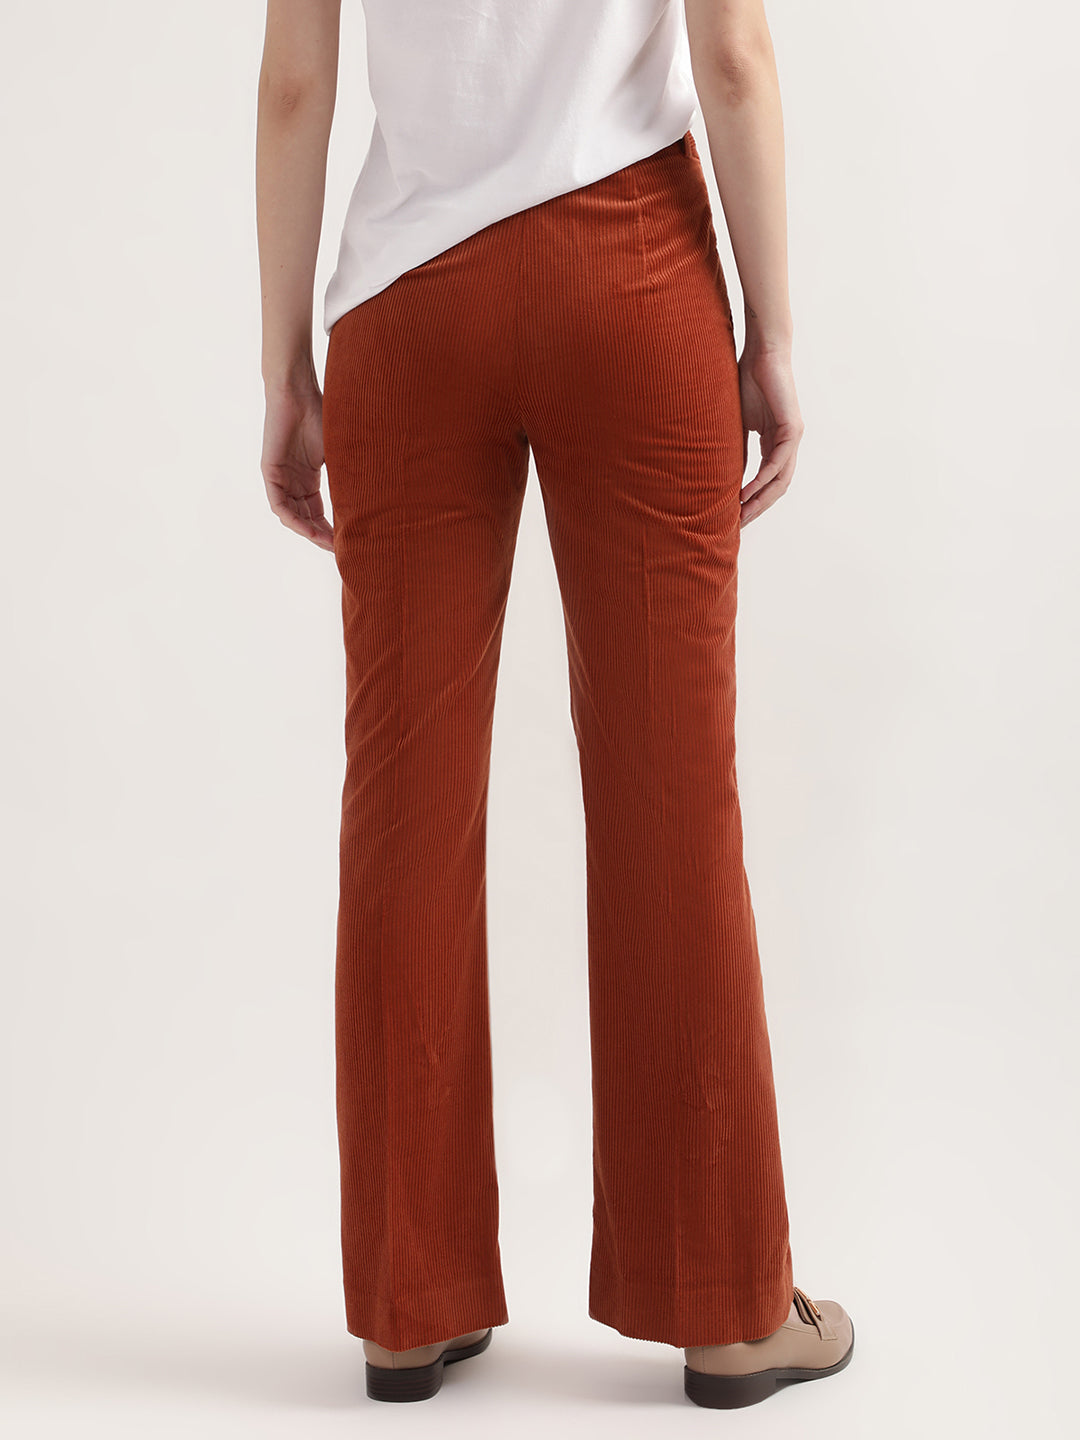 Gant Women Rust Striped Cotton Straight Fit Bootcut Trousers